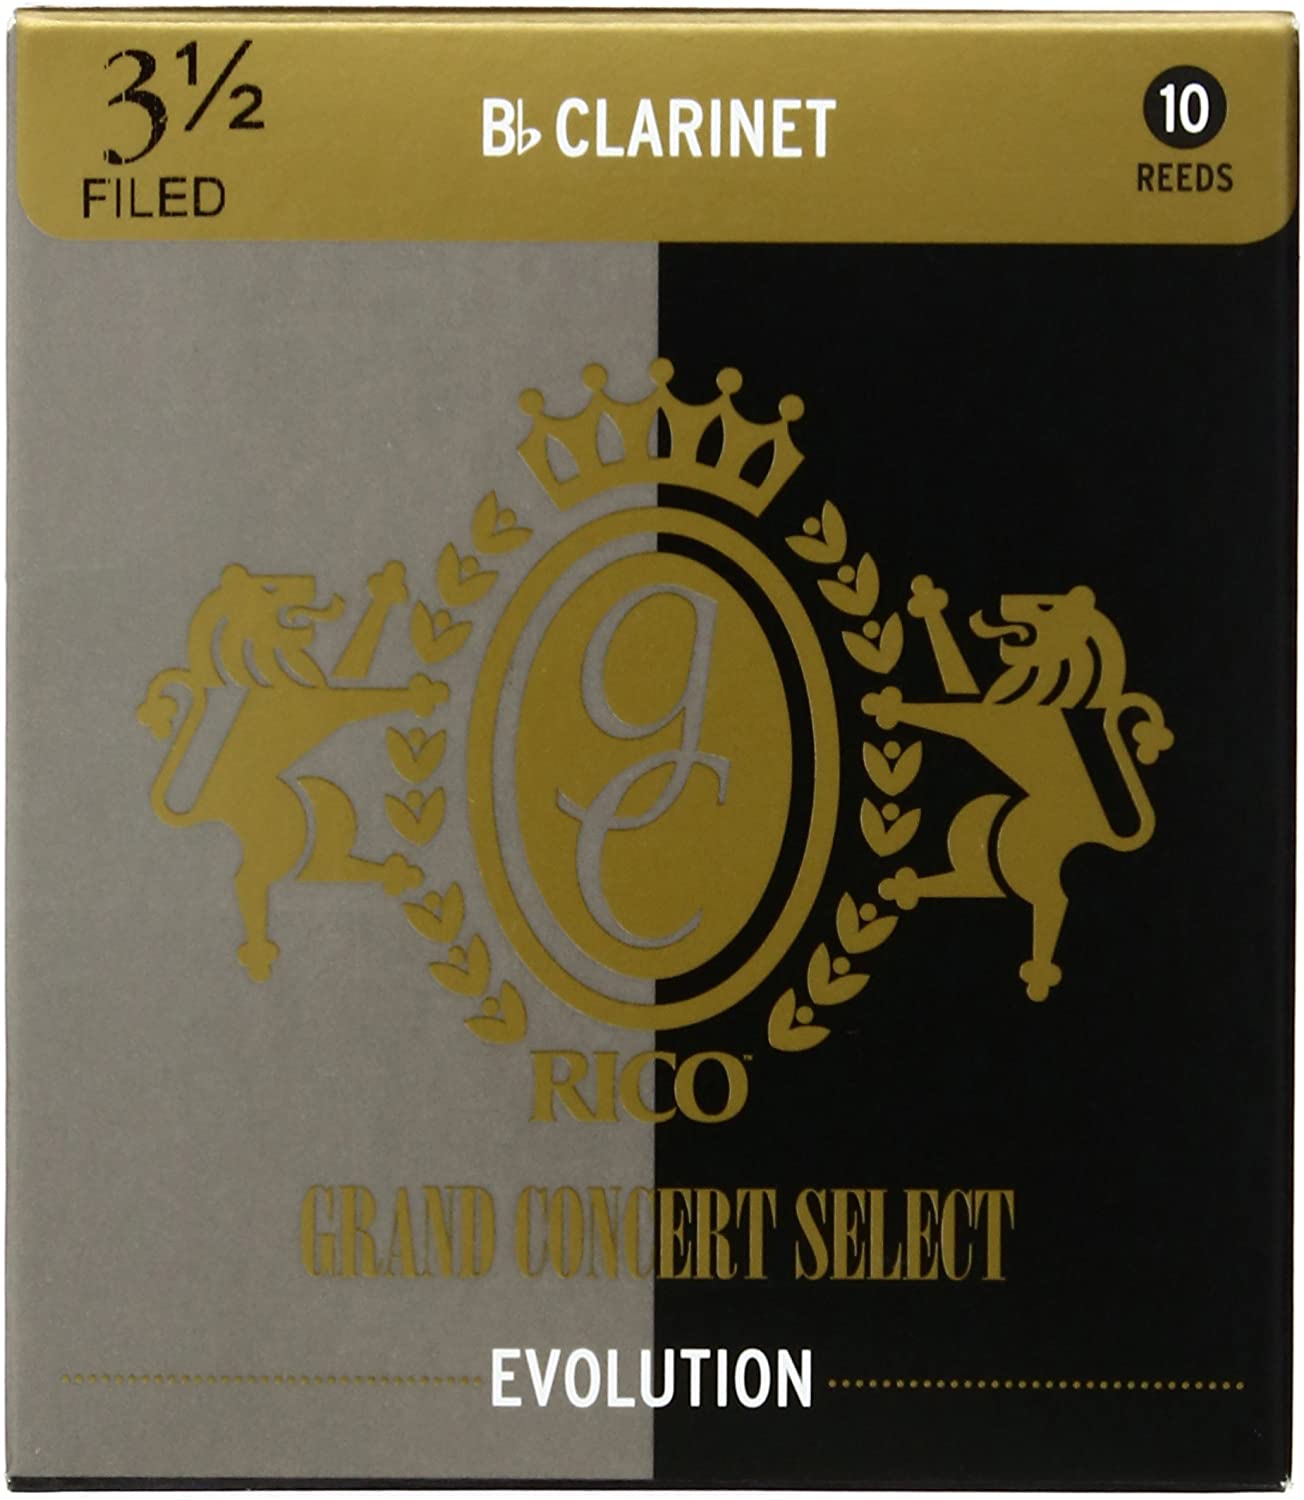 D'Addario WoodWinds  リード Bbクラリネット用 GRAND CONCERT SELECT EVOLUTION FILED EVF10BCL350 [硬さ:3.5] 10枚入り